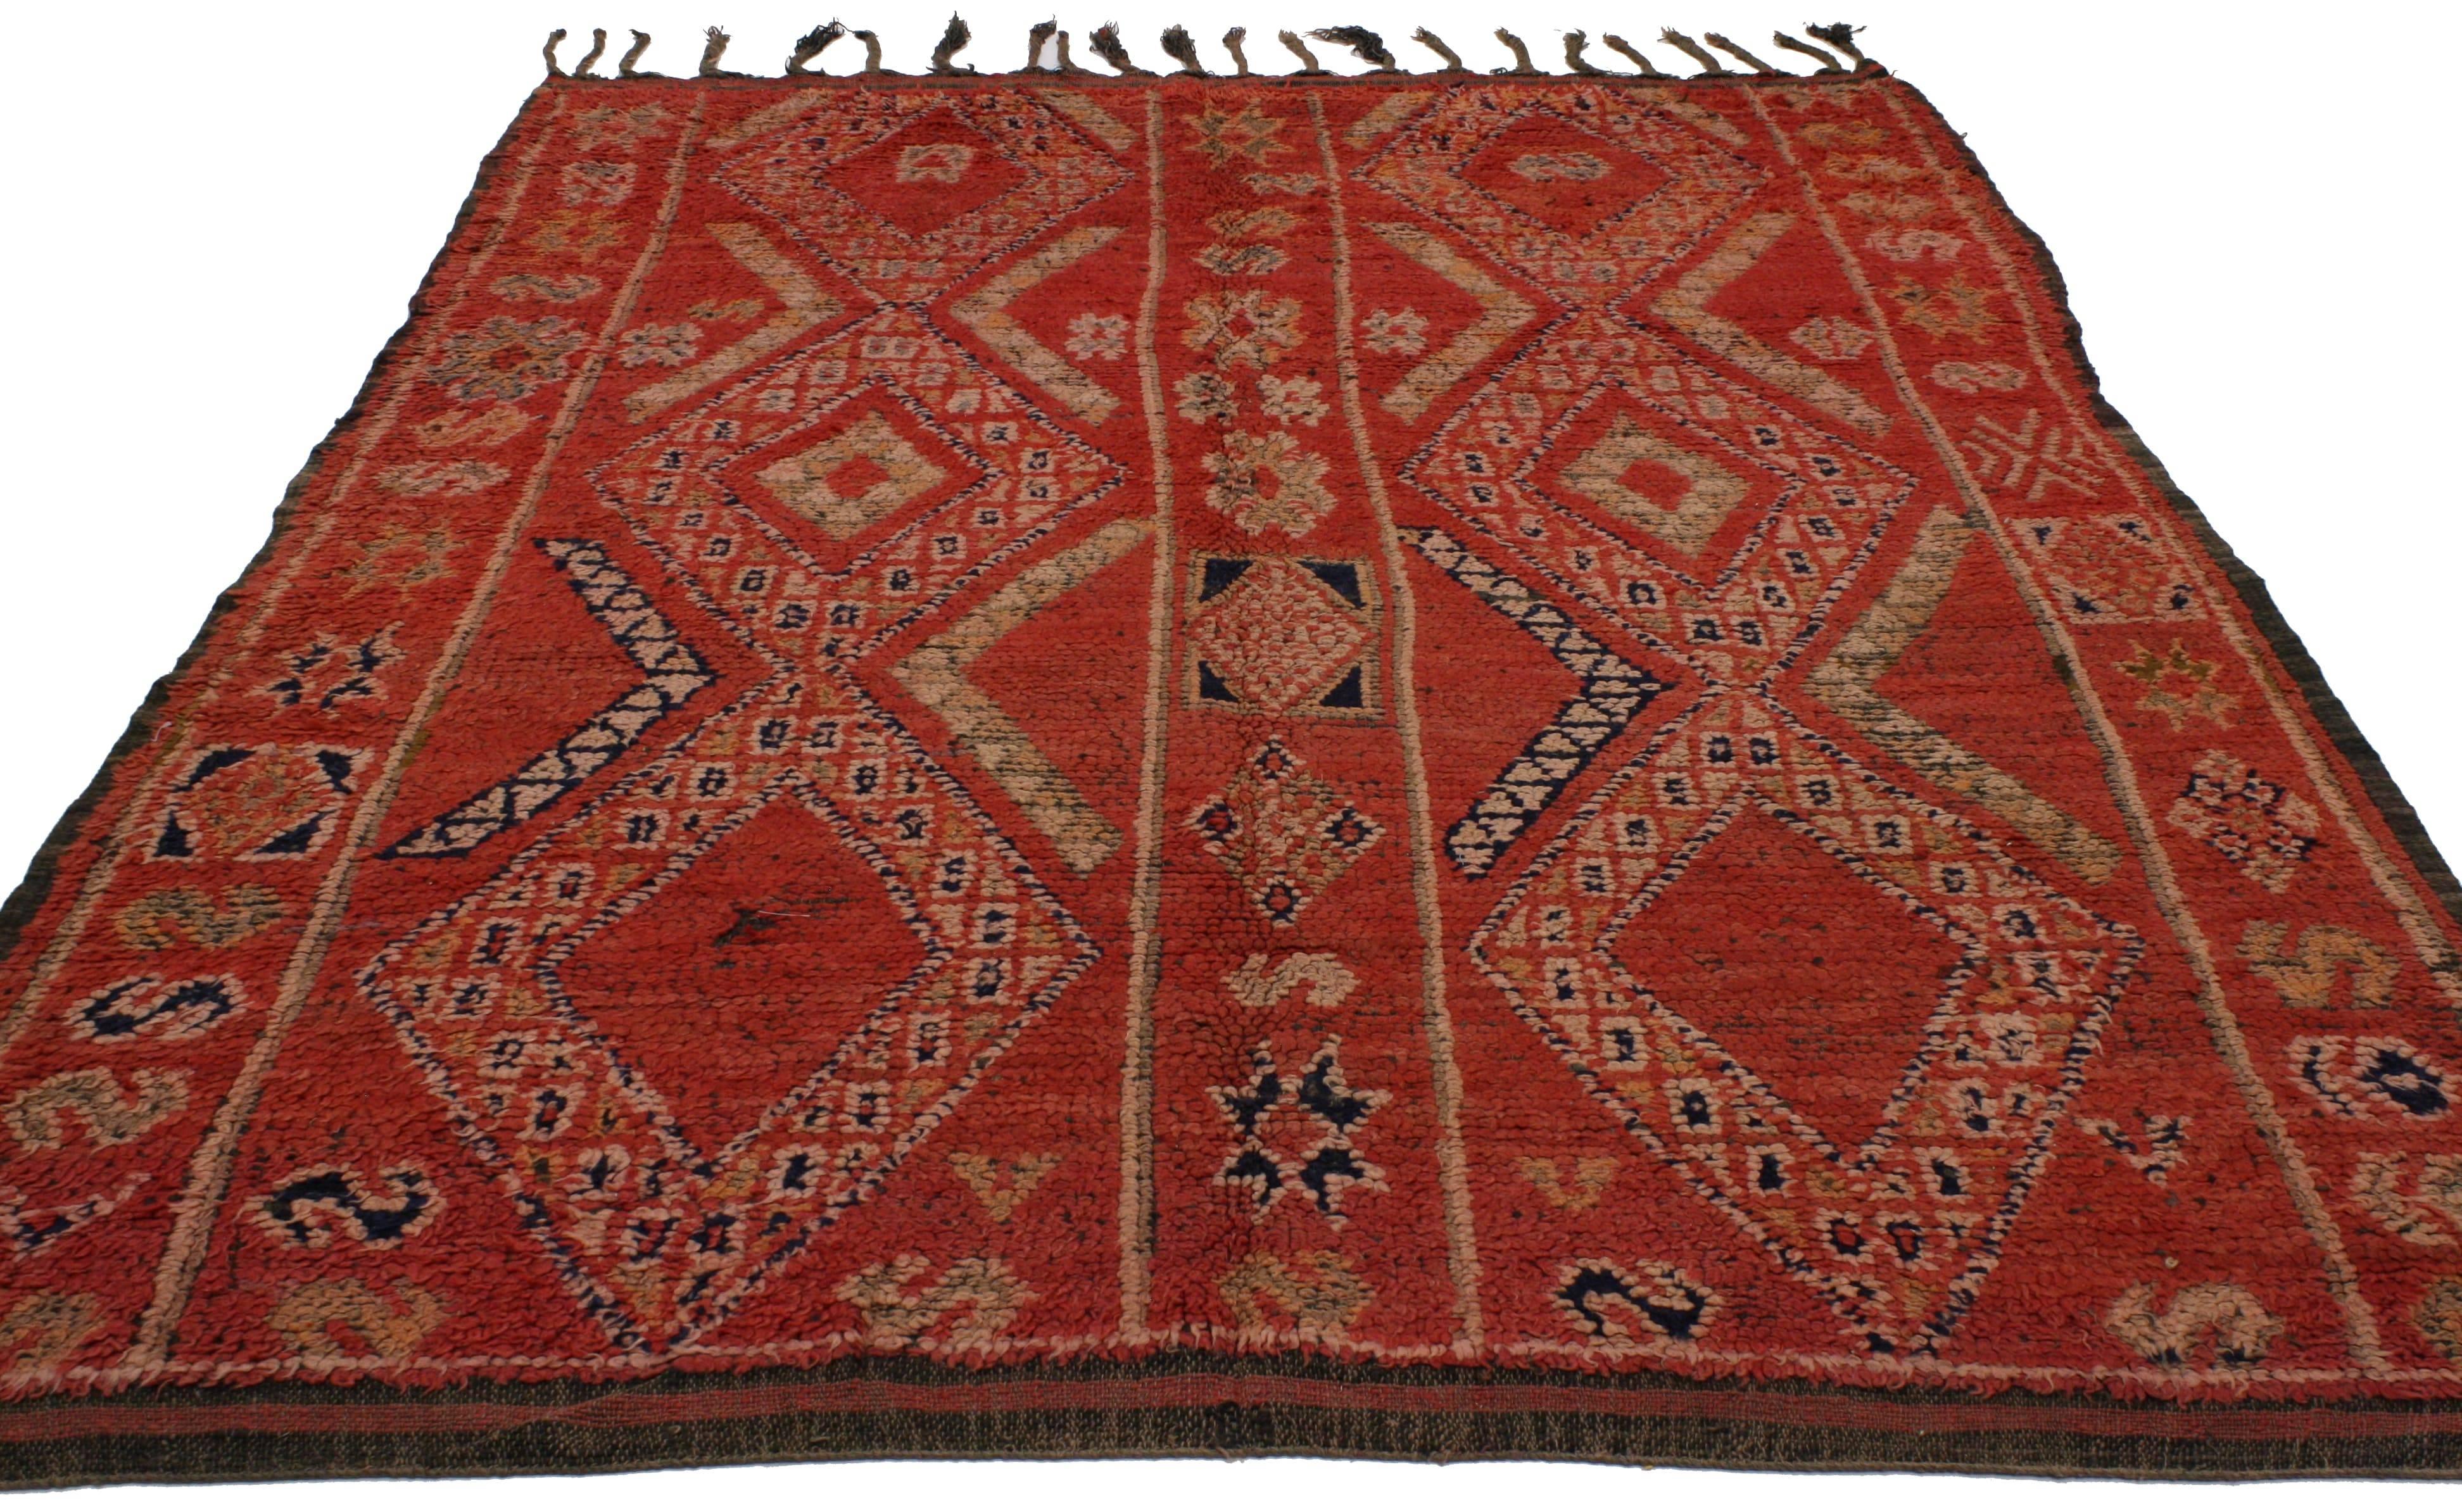 20248, Vintage Berber Moroccan Rug with Tribal Style. Variegated shades of red provide a beautiful backdrop for the intricately woven diamonds that ornament this hand-knotted wool vintage Berber Moroccan rug. More than the asymmetrical beauty found